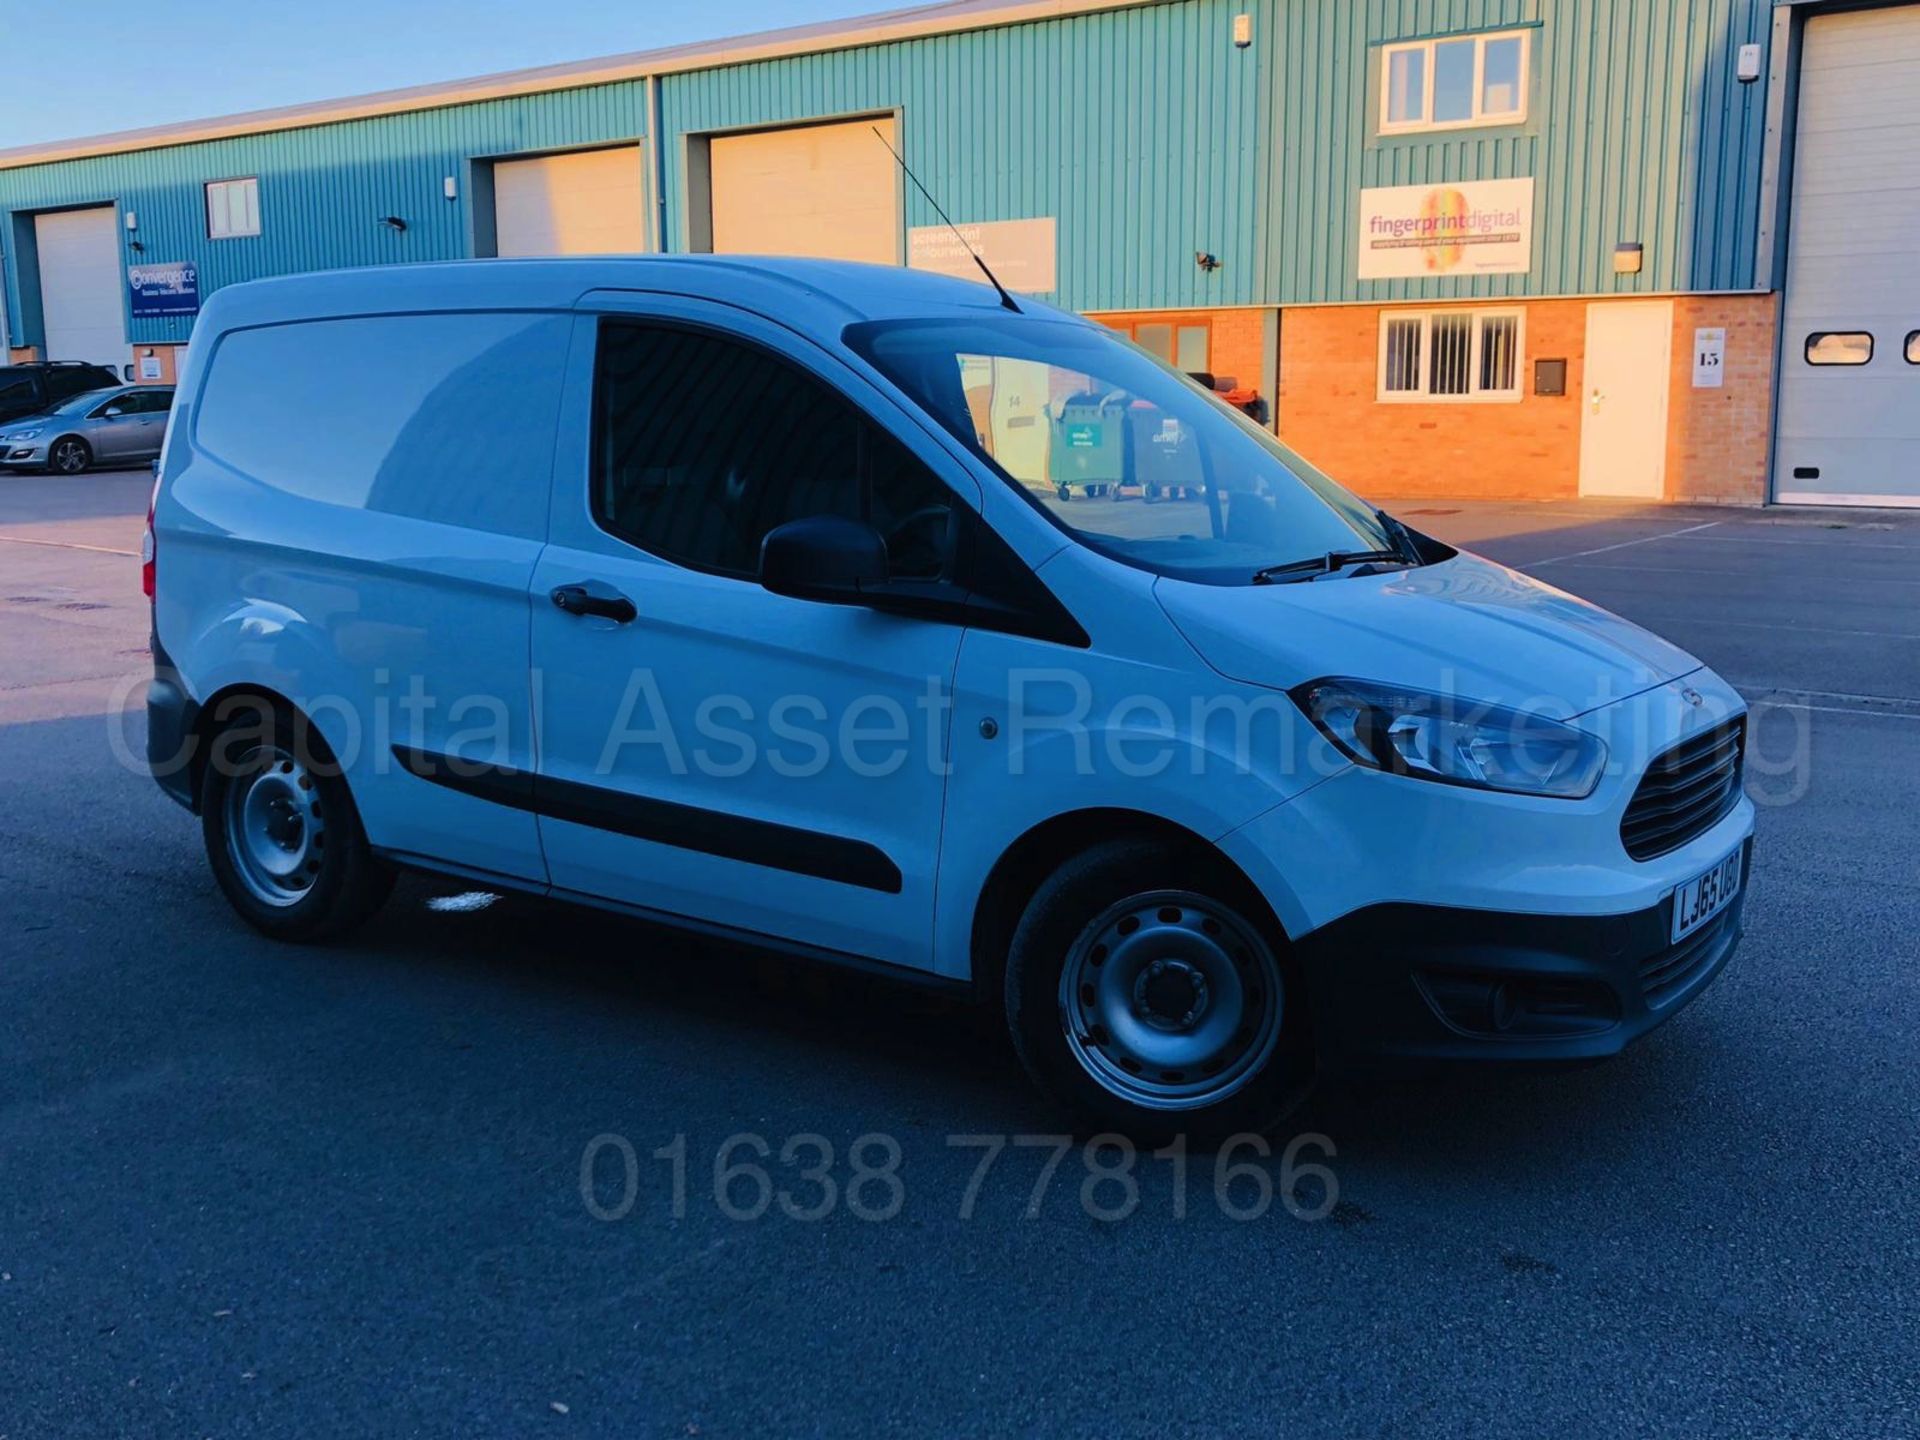 (On Sale) FORD TRANSIT COURIER *BASE EDITION* (2016 MODEL) '1.5 TDCI - 75 BHP - 5 SPEED' (PANEL VAN) - Image 10 of 29